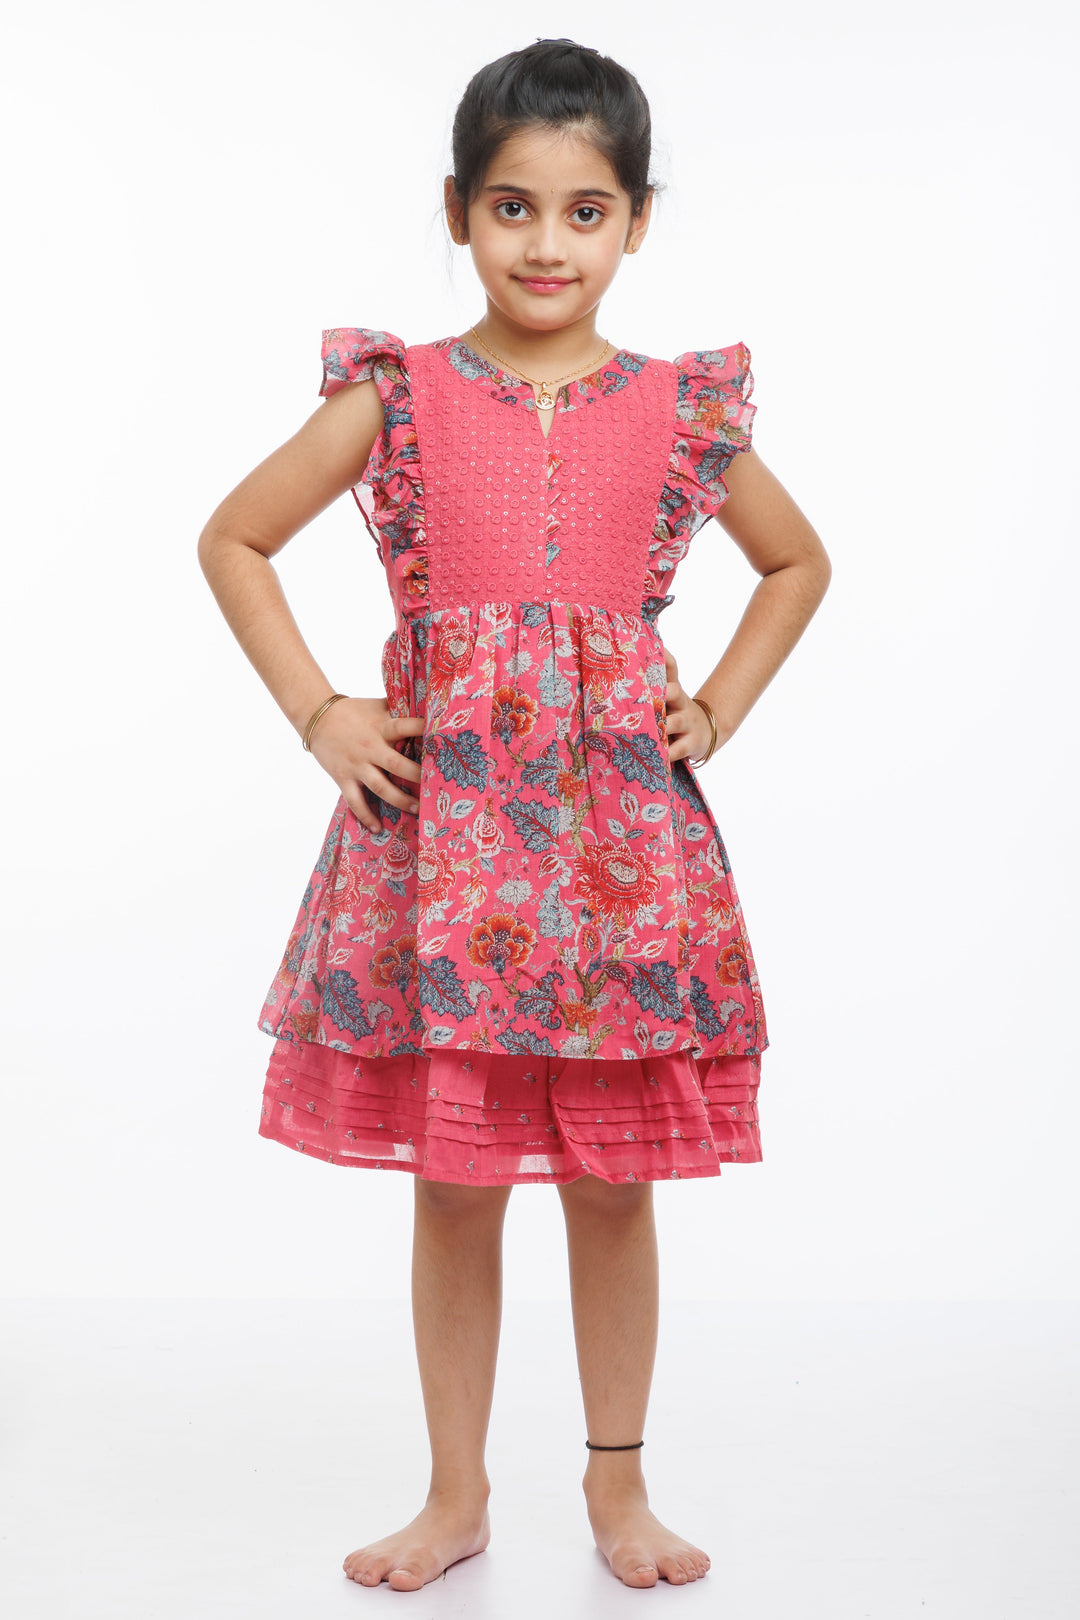 The Nesavu Girls Cotton Frock Enchanted Garden: Girls Floral Textured Cotton Frock with Flutter Sleeves Nesavu 22 (4Y) / Pink / Cotton GFC1293B-22 Burgundy Floral Girls Cotton Frock | Perfect for Every Occasion | The Nesavu